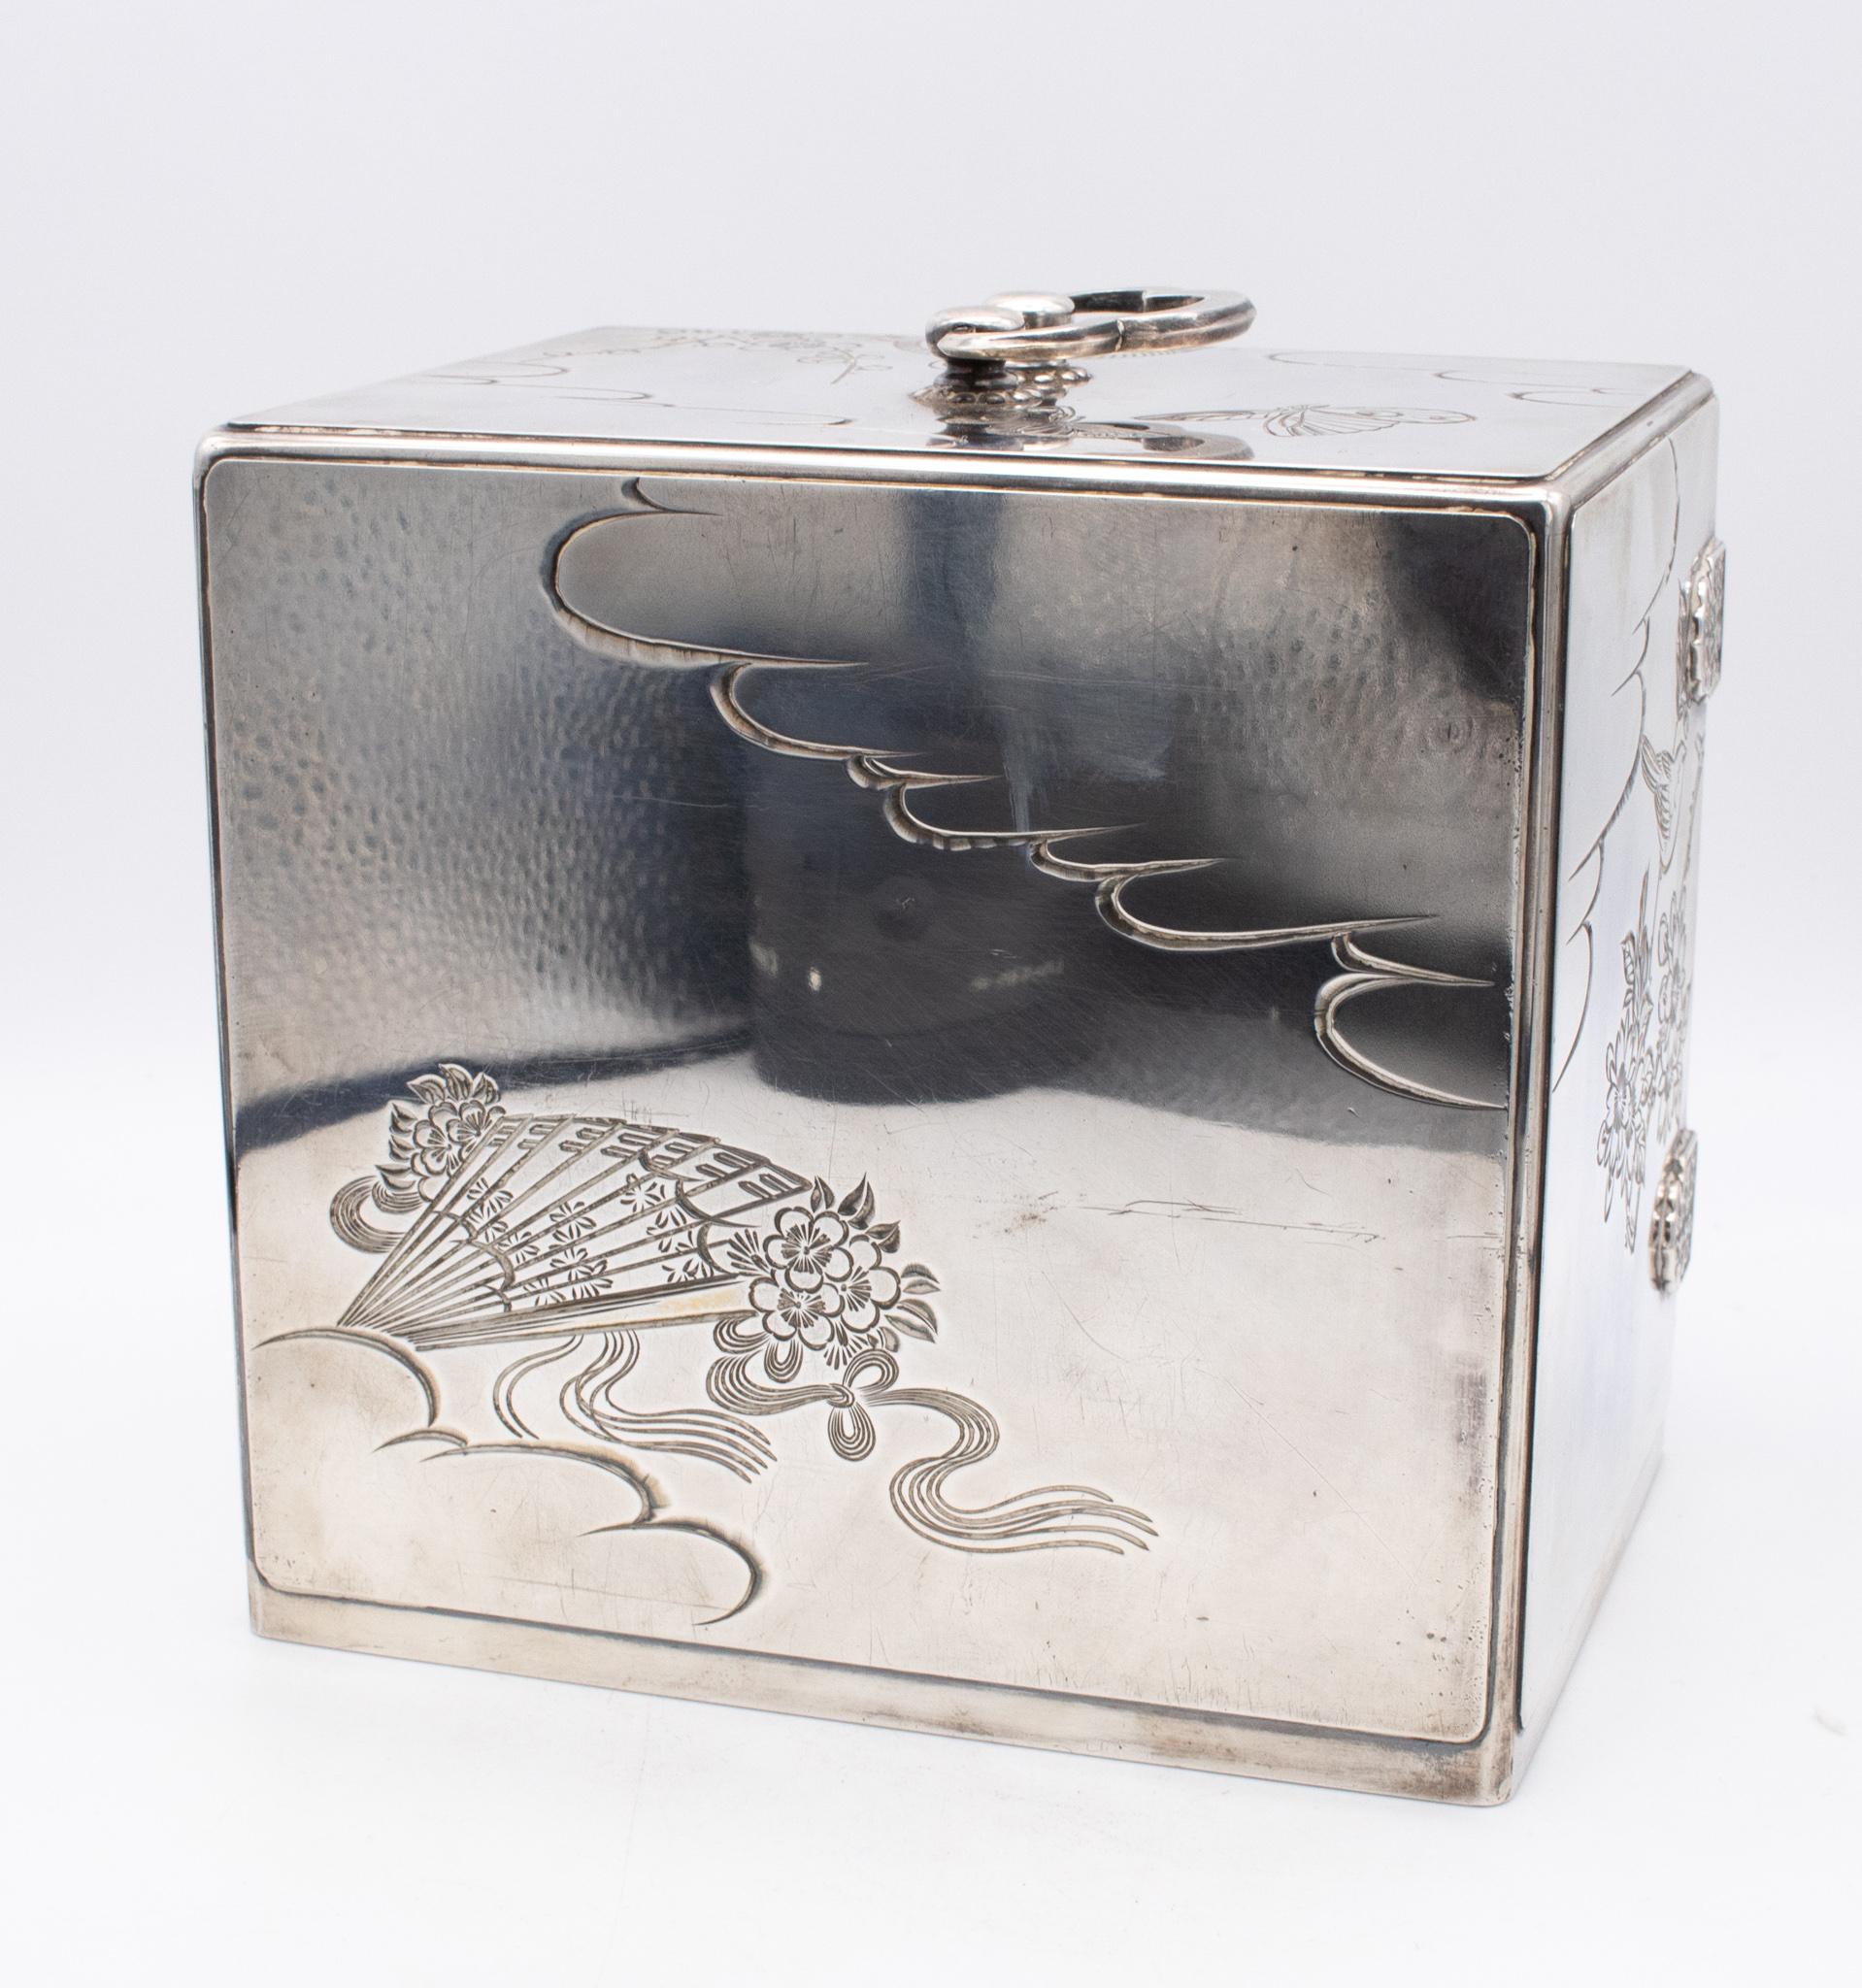 Japan Meiji Period 1868-1912 Jewel Box with Compartments Drawers Sterling Silver 2